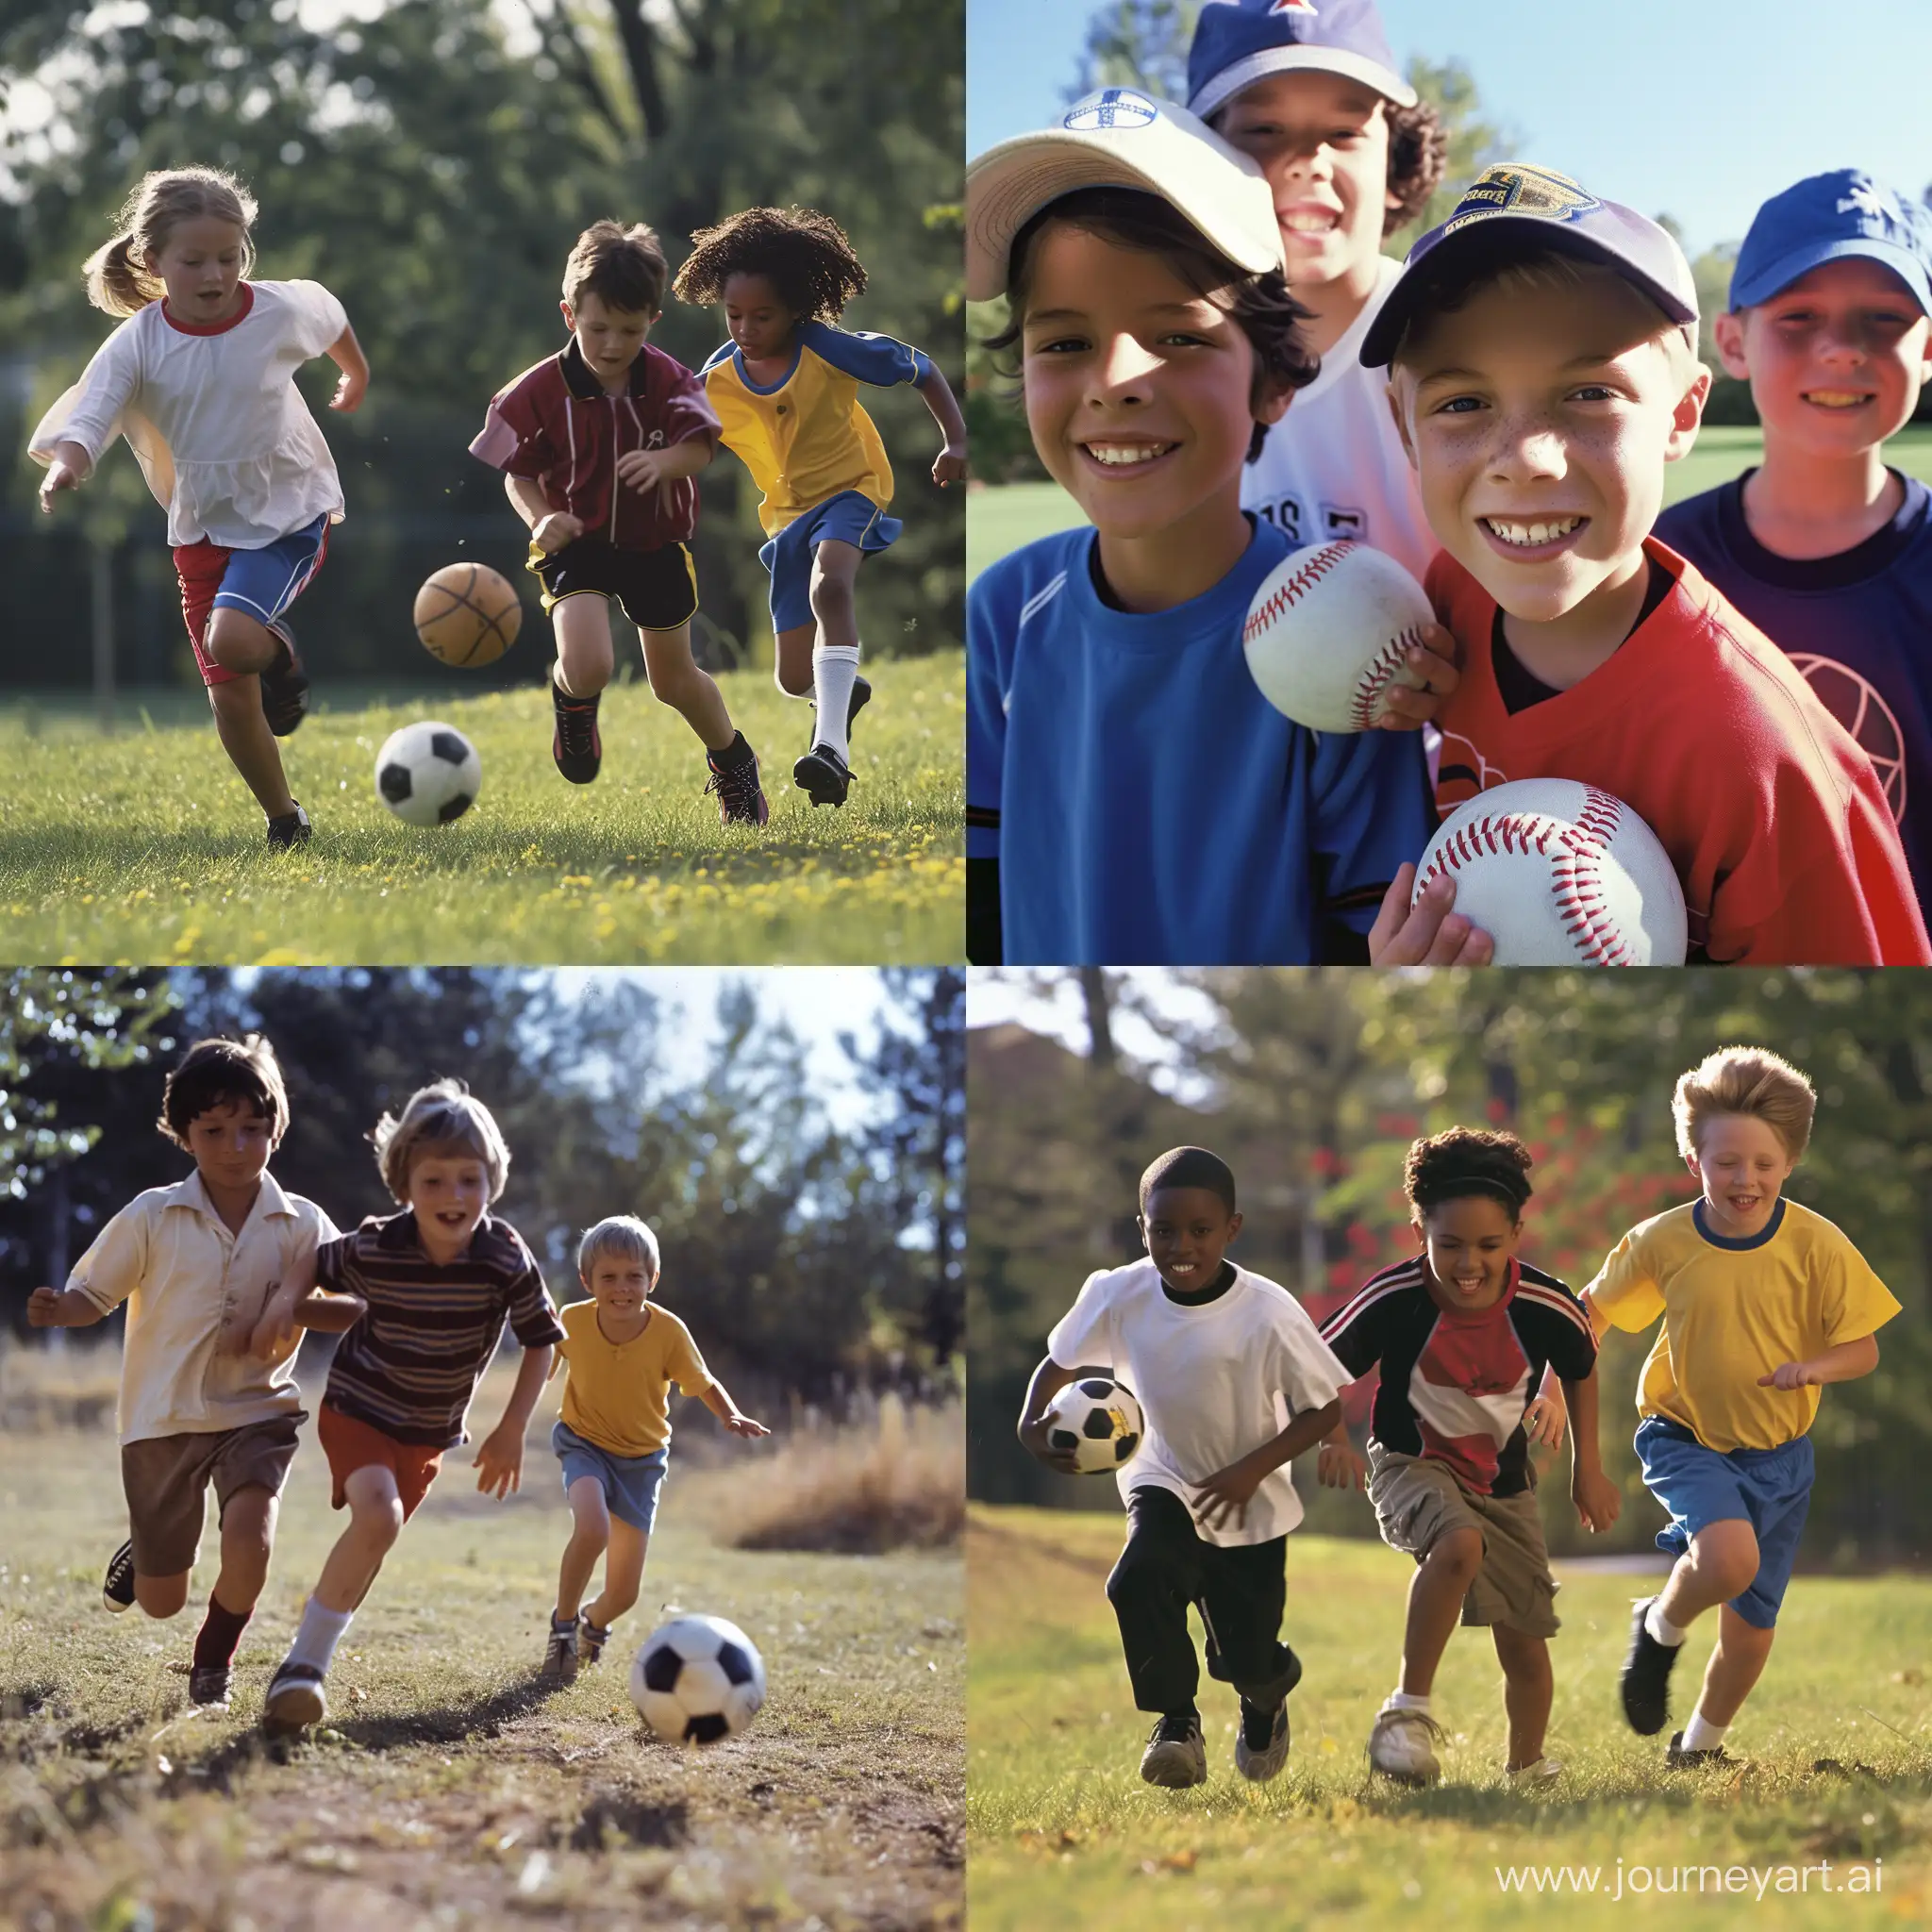 Childhood-Team-Sports-Active-Children-Playing-Together